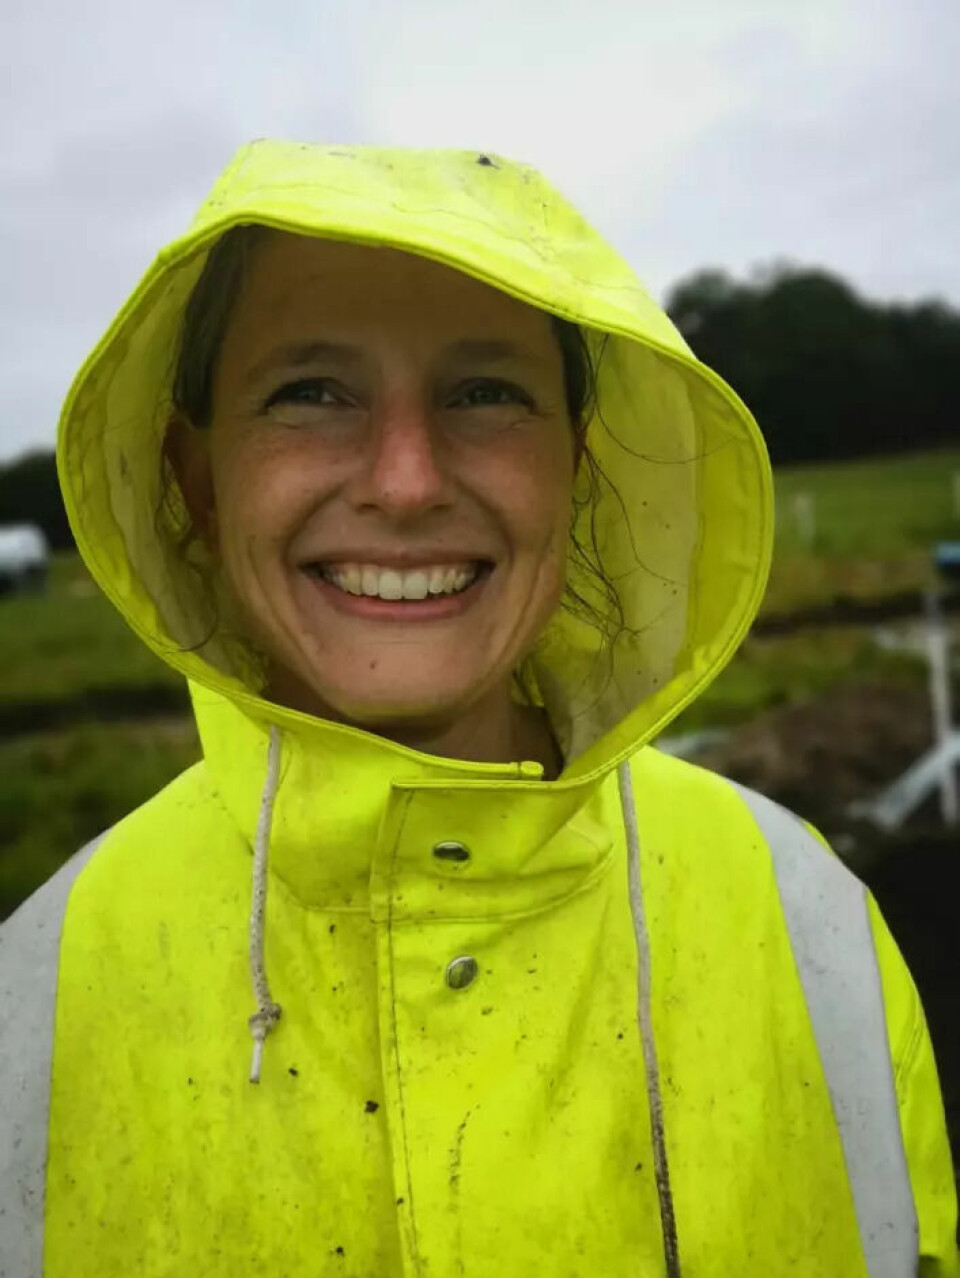 County archaeologist Sigrid Mannsåker Gundersen has followed the Gjellestad Ship since its discovery almost seven years ago.